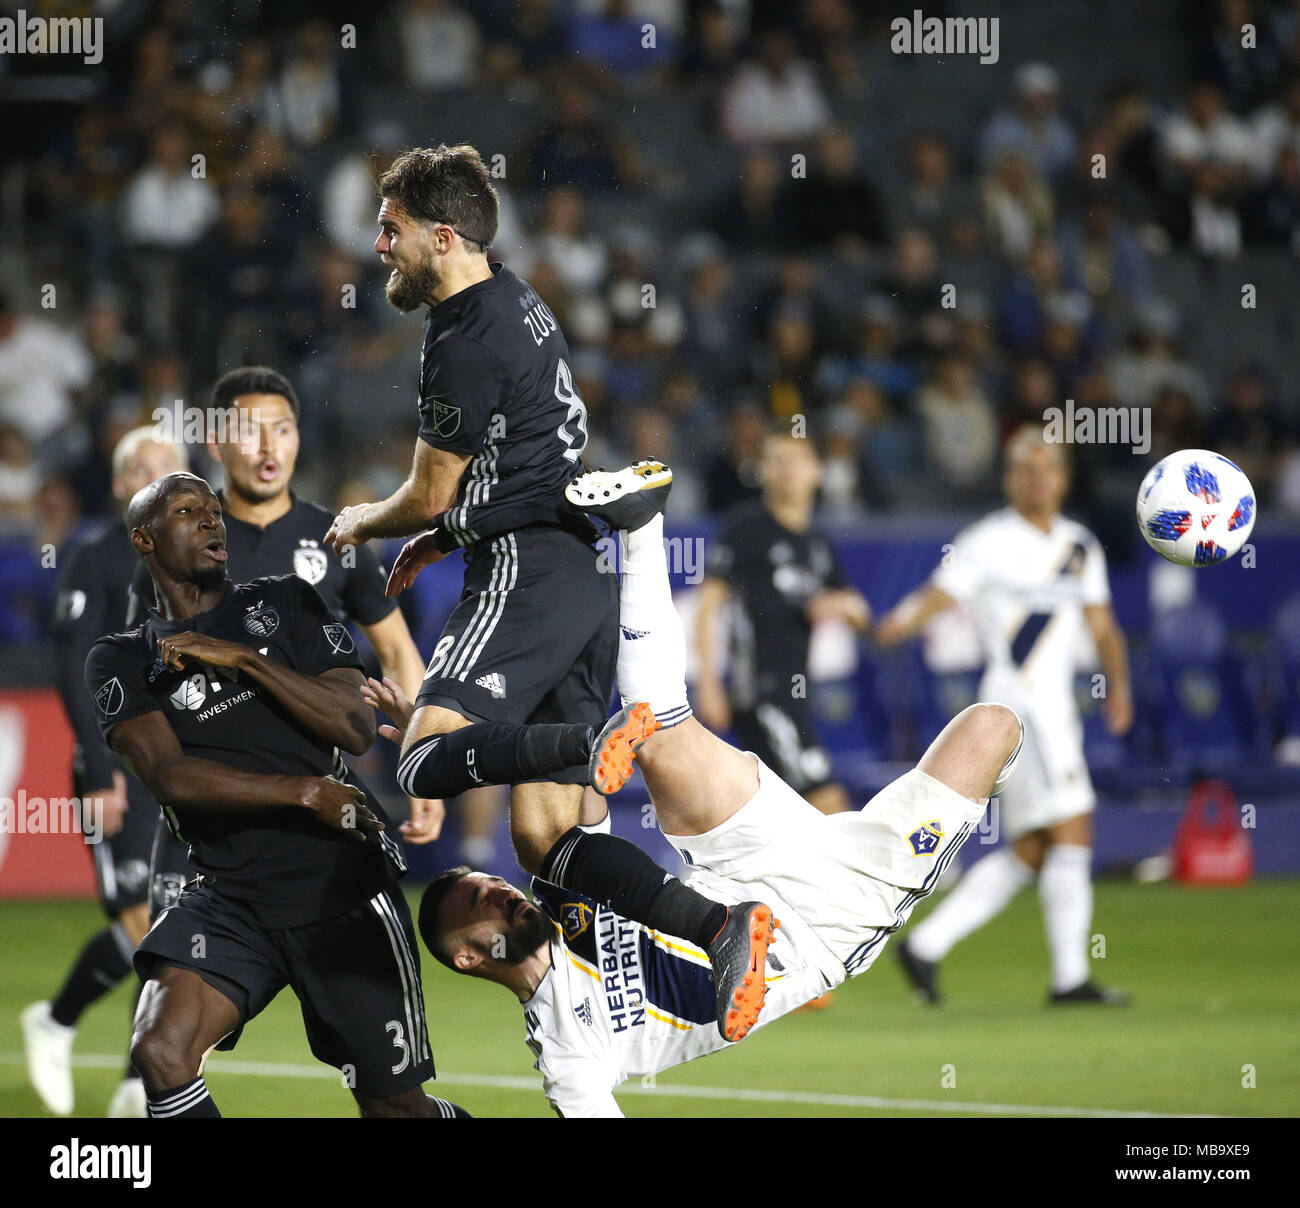 April 8, 2018 - Los Angeles, California, U.S - Los Angeles GalaxyÃ•s midfielder Romain Alessandrini (7) of France, goes up for a reverse kick against Sporting Kansas CityÃ•s defender Graham Zusi (8) and Sporting Kansas CityÃ•s defender Ike Opara (3) during the 2018 Major League Soccer (MLS) match between Los Angeles Galaxy and Sporting Kansas City in Carson, California, April 8, 2018. Sporting Kansas City won 2-0. (Credit Image: © Ringo Chiu via ZUMA Wire) Stock Photo